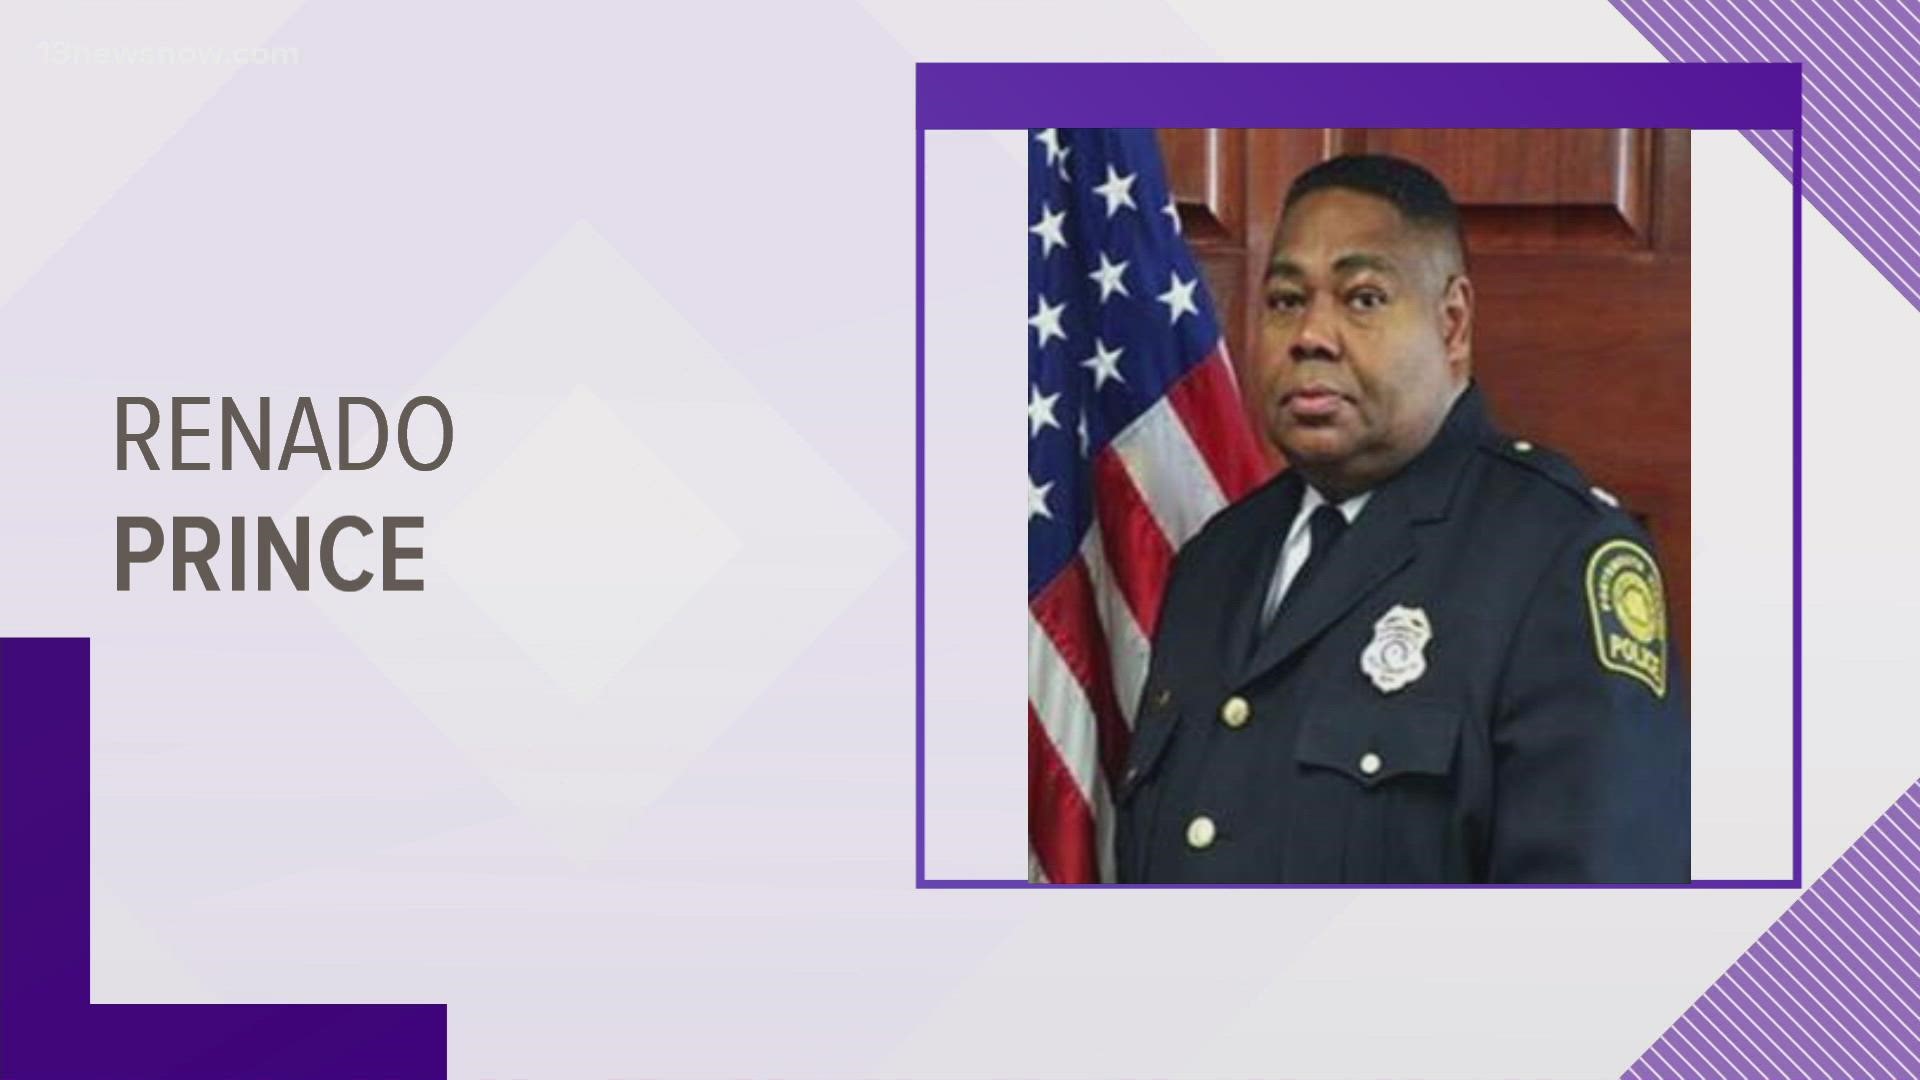 Prince has worked in law enforcement for 38 years and has been with Portsmouth police since 2018.